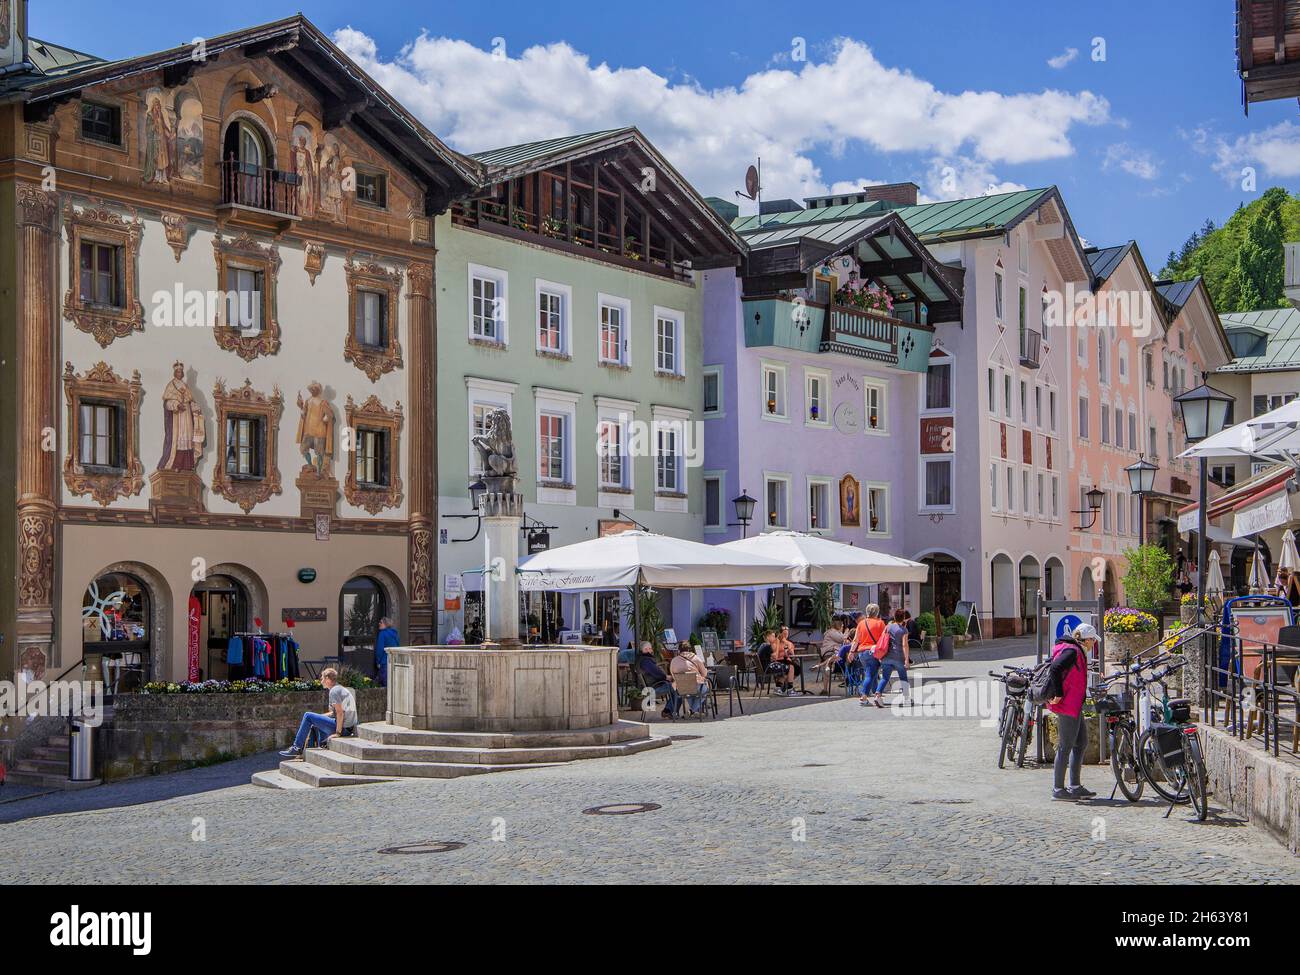 historic houses on the market square with market fountain and street cafe,berchtesgaden,berchtesgaden alps,berchtesgadener land,upper bavaria,bavaria,germany Stock Photo